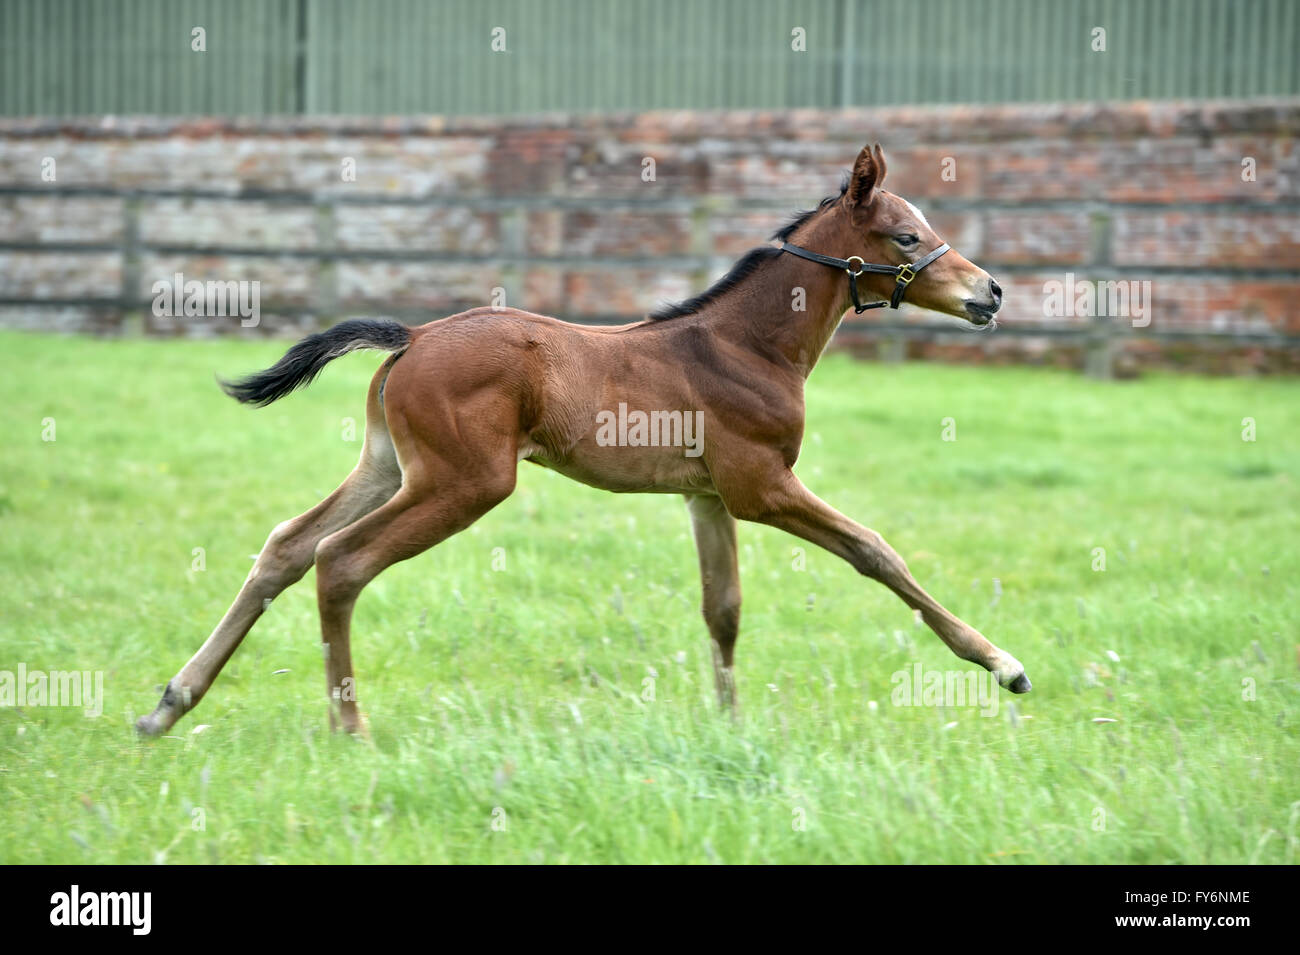 Thoroughbred bay Foal cantering in grass paddock Stock Photo